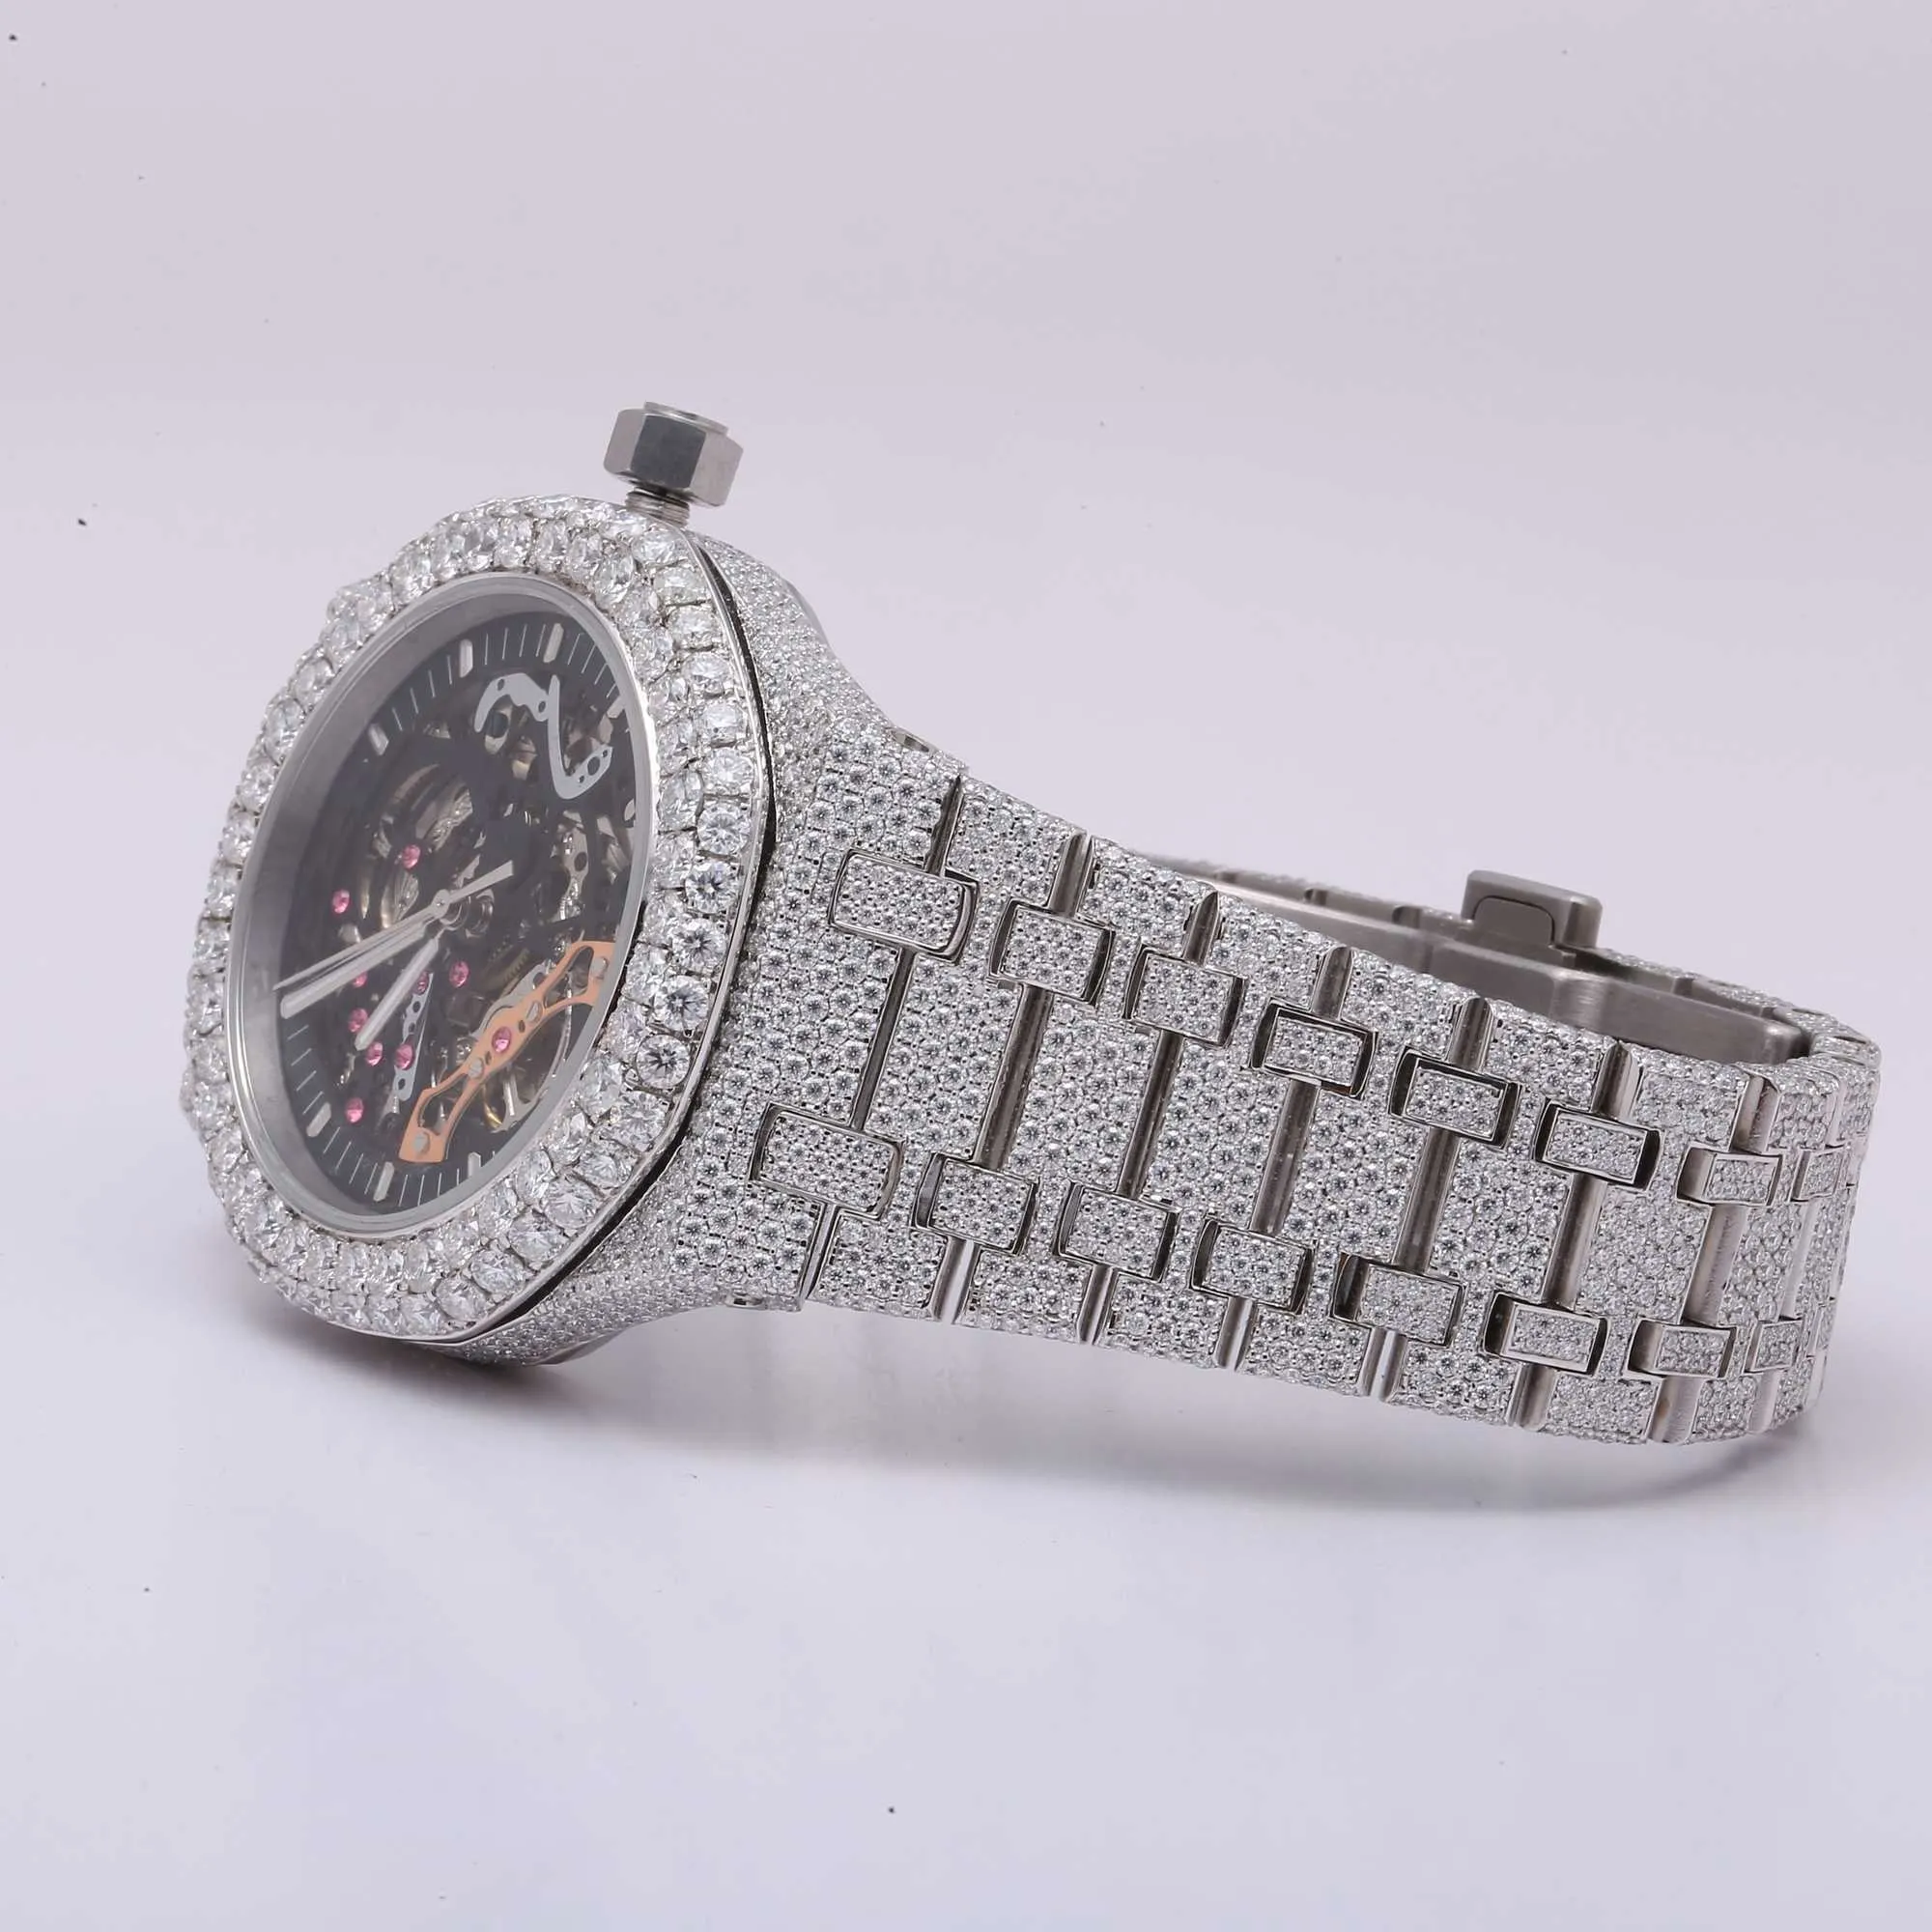 Other Watches Wristwatches iced out customize diamond luxury men' handmade fine jewelry manufacturer VVS1 diamond watchUIJY6T3S